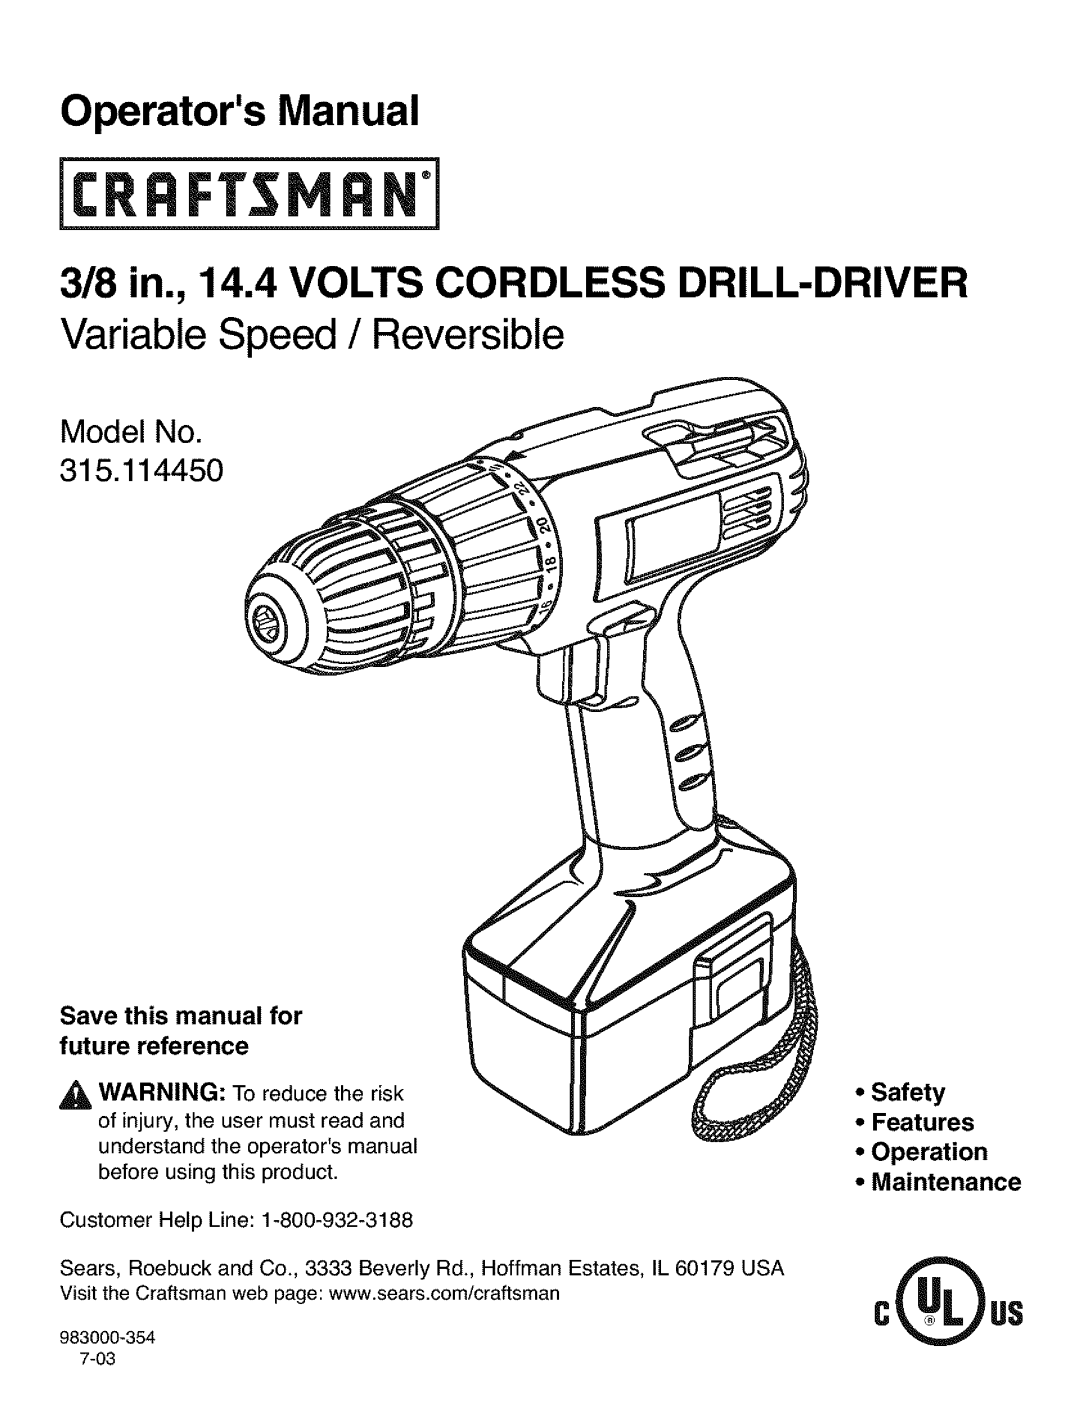 Craftsman 315.11445 manual Save this manual for, Safety Features Operation Maintenance, OperatorsManual, Model No 